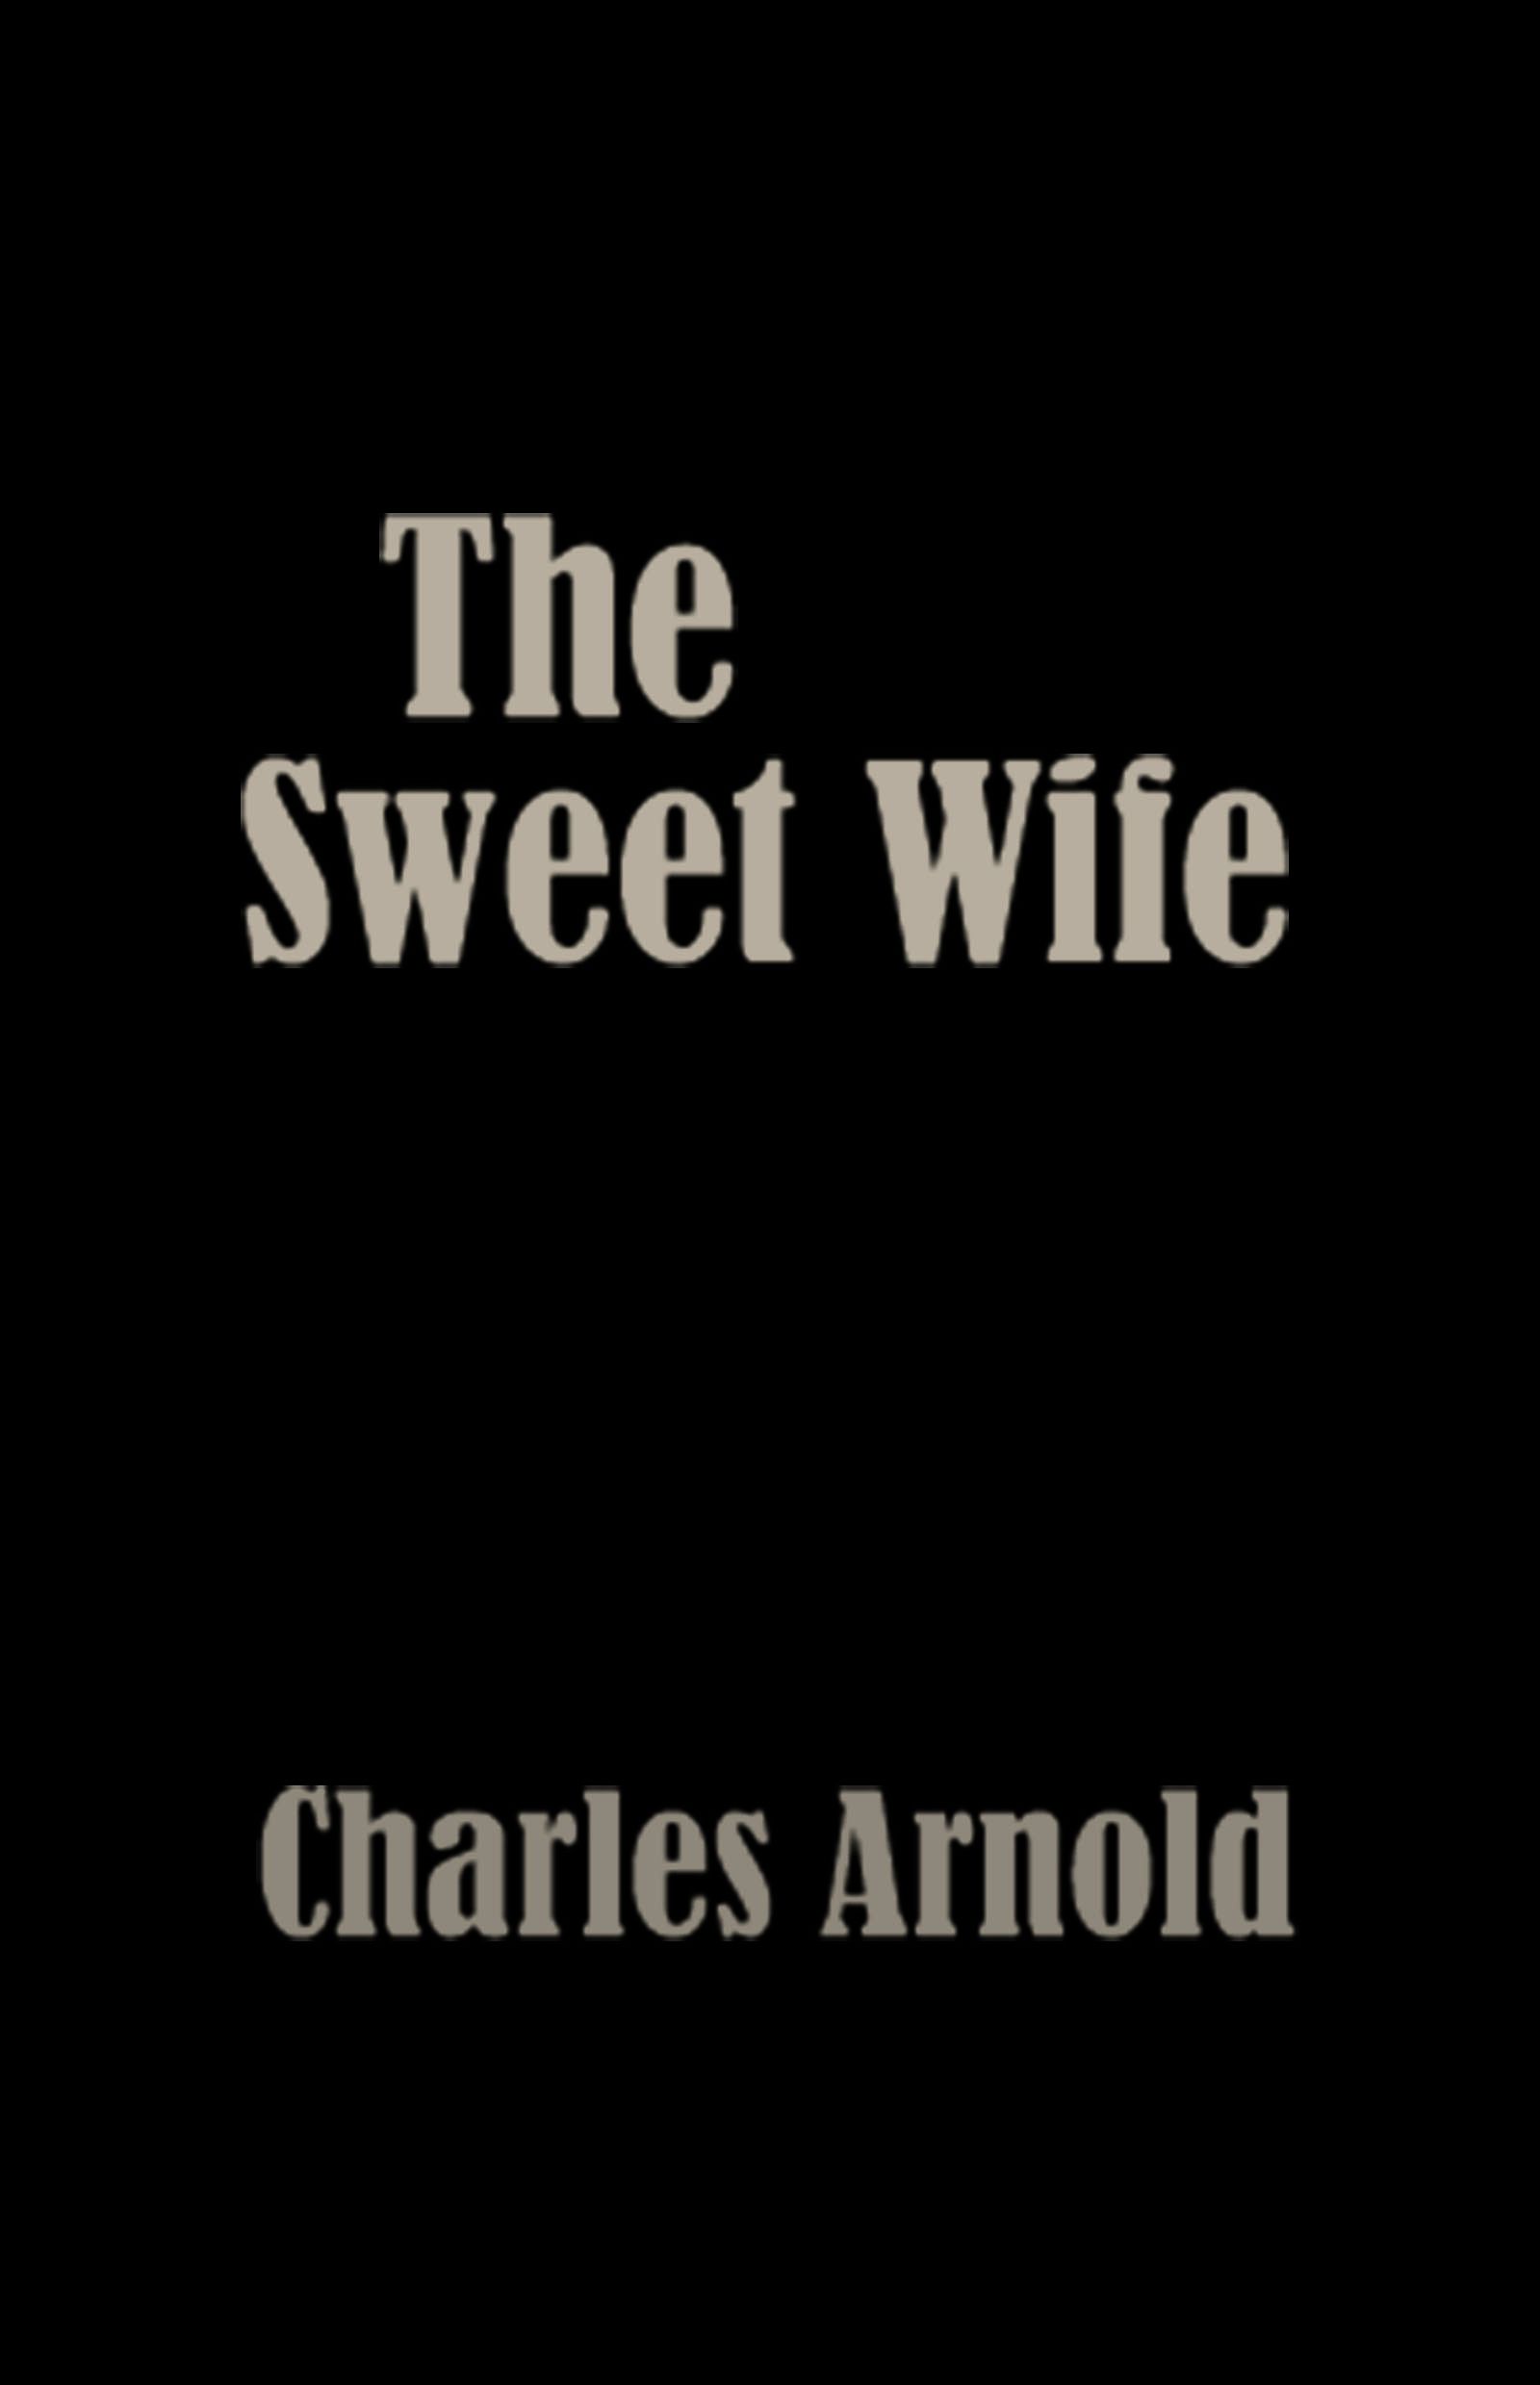 The Sweet Wife by Charles Arnold